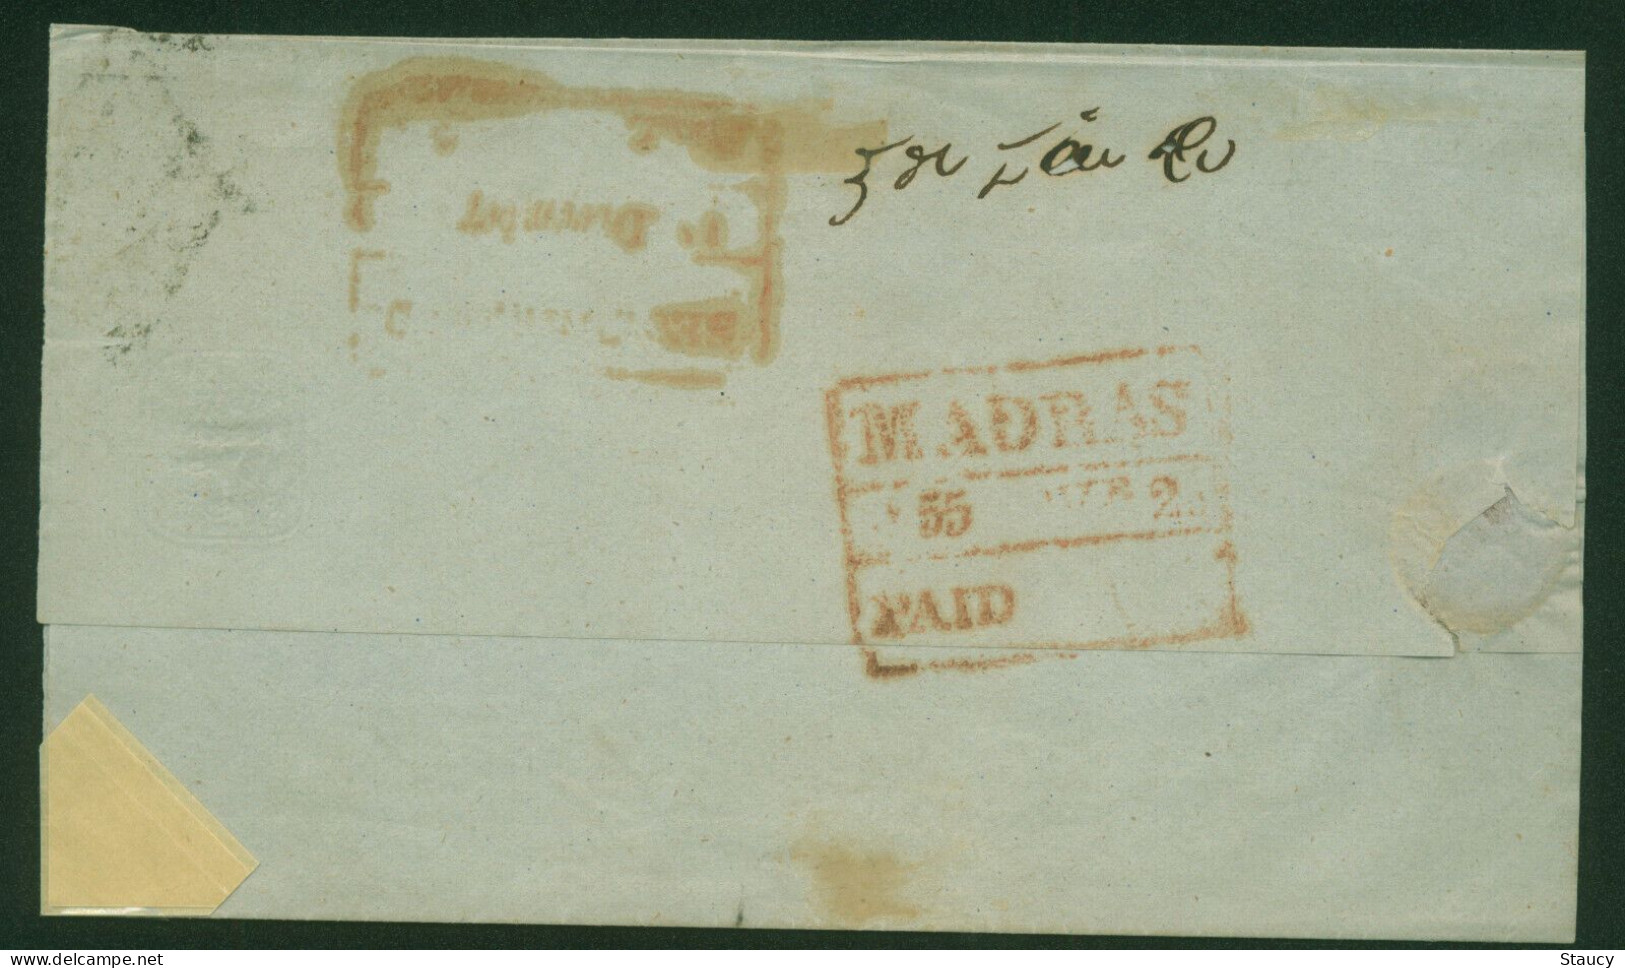 British India 1854 QV 1/2a Half Anna Litho / Lithograph Stamp Franking On Cover Madras To Secunderabad As Per Scan - 1854 East India Company Administration